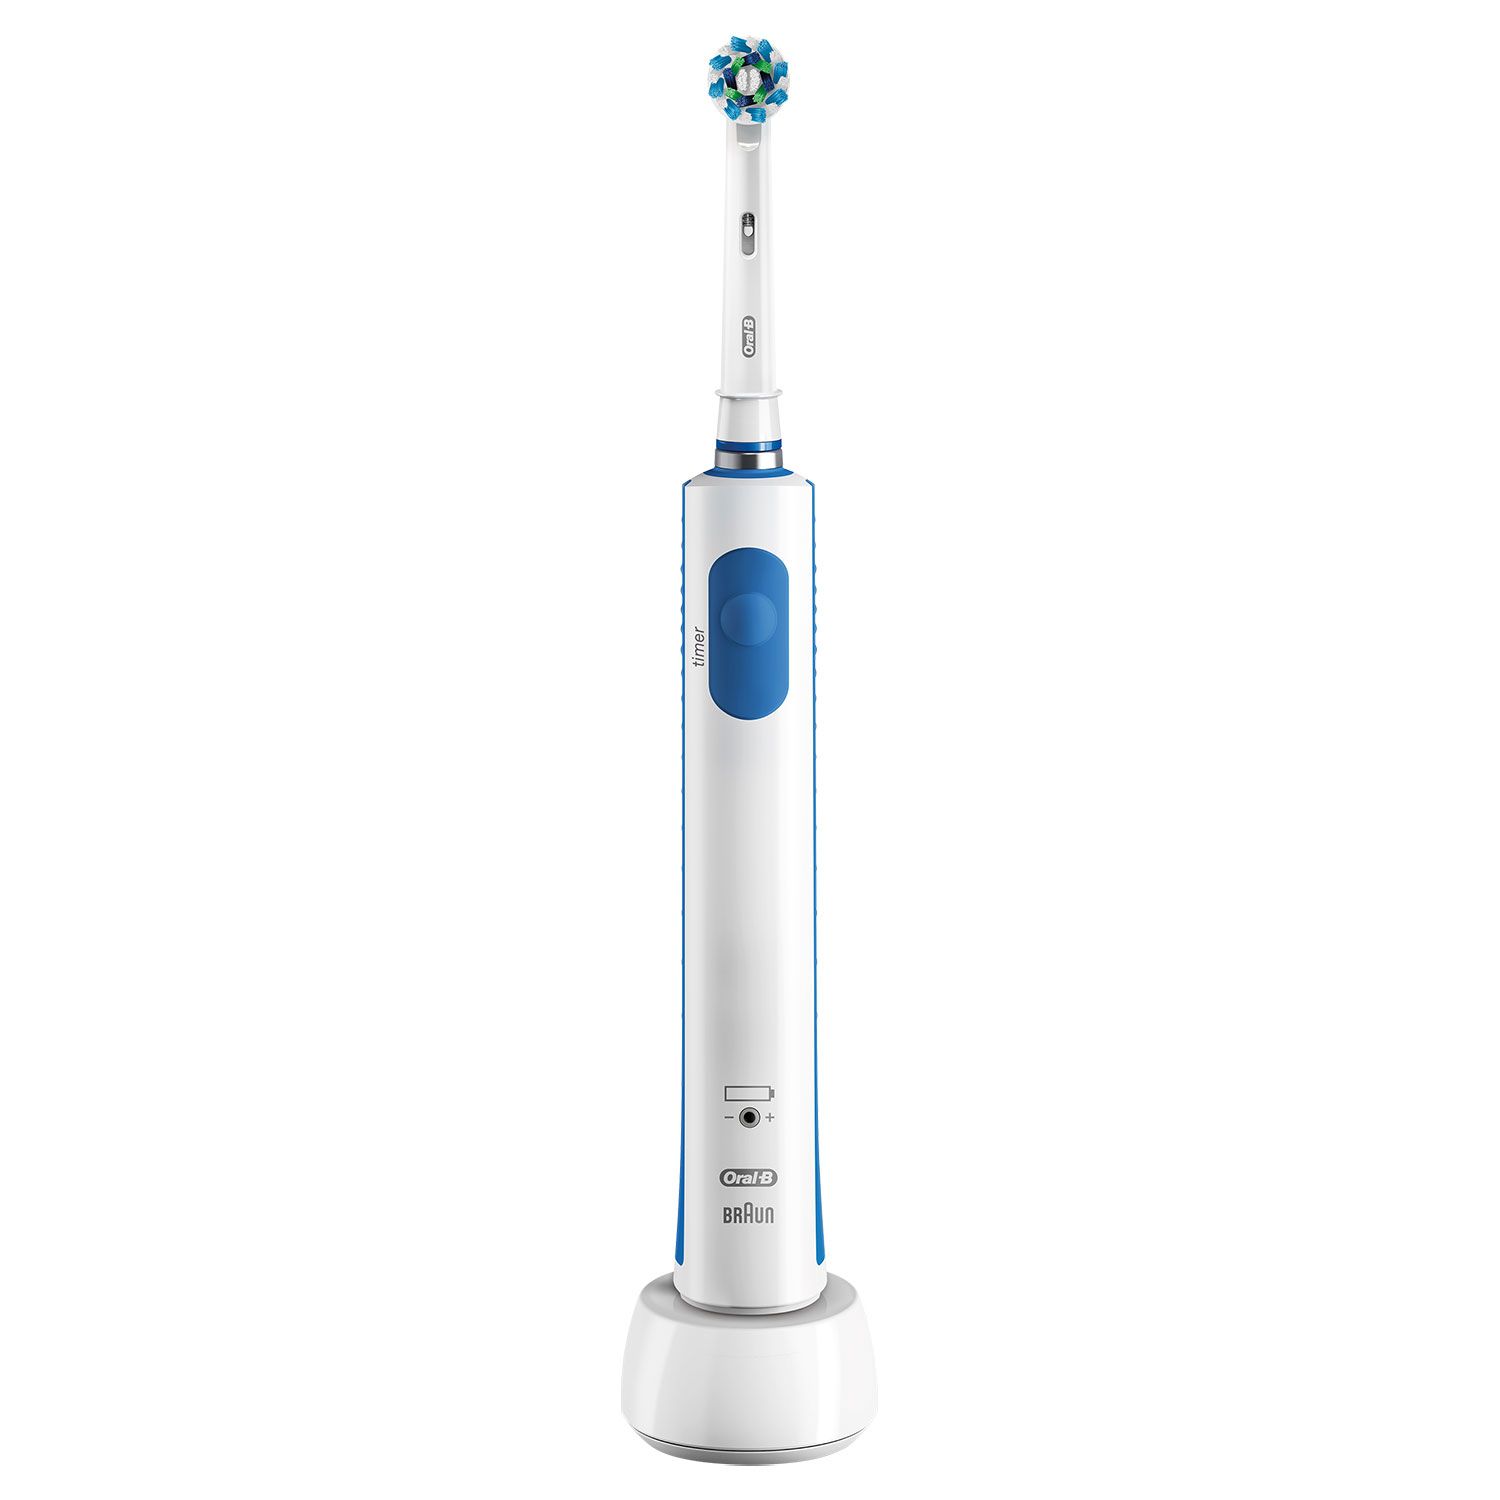 Oral B Pro 570 Cross Action Limited Edition Brush and Refill

Tired of manual toothbrushes? Switch to an Oral-B Pro 2000 Cross Action Electric Toothbrush for a faster, more thorough clean. The professionally inspired design of the cross action toothbrush head surrounds each tooth with bristles angled at 16 degrees, and 3D cleaning action oscillates, rotates, and pulsates to break up and remove up to 100 percent plaque than a regular manual toothbrush. It provides a clinically proven superior clean versus a regular manual toothbrush. The Visible Pressure Sensor lights up if you brush too hard to prevent harmful over-brushing and there are two modes - daily clean and gum care. Used by dentists worldwide, it is compatible with the following replacement toothbrush heads: CrossAction, 3D White, Sensitive Clean, Precision Clean, Floss Action, Trizone and Dual Clean.

Key Features:

    Comes with 3D cleaning action that easily adapts to your teeth.
    Pressure sensor lights up to alert when the user is brushing too hard.
    Removes up to 100% more plaque than a regular manual toothbrush.
    Buzzes every 30 seconds to focus on brushing the next quadrant of your mouth.
    Alerts user when brushed for the dentist-recommended time of 2 minutes.
    Offers a variety of replacement toothbrush heads to fit different oral health needs.
    Fully charged electric toothbrush lasts for up to 7 days with regular use.


How to use : 

    Step 1: Make sure your toothbrush is charged.
    Step 2: Start with the outside surfaces of the teeth. Guide the brush head slowly from tooth to tooth, holding the brush head in place for a few seconds against each tooth before moving on to the next one. Follow along with the shape of each tooth and the curve of the gums.
    Step 3: Repeat Step 2 on the inside surfaces of the teeth.
    Step 4: Repeat Step 2 on the chewing surfaces of the teeth as well as behind the back teeth.
    Step 5: Direct the brush head along the gum line and upon the gums. Again, do not press hard or scrub.
    Step 6: Try grazing the brush head along your tongue and the roof of your mouth, back to front, to help freshen your breath.